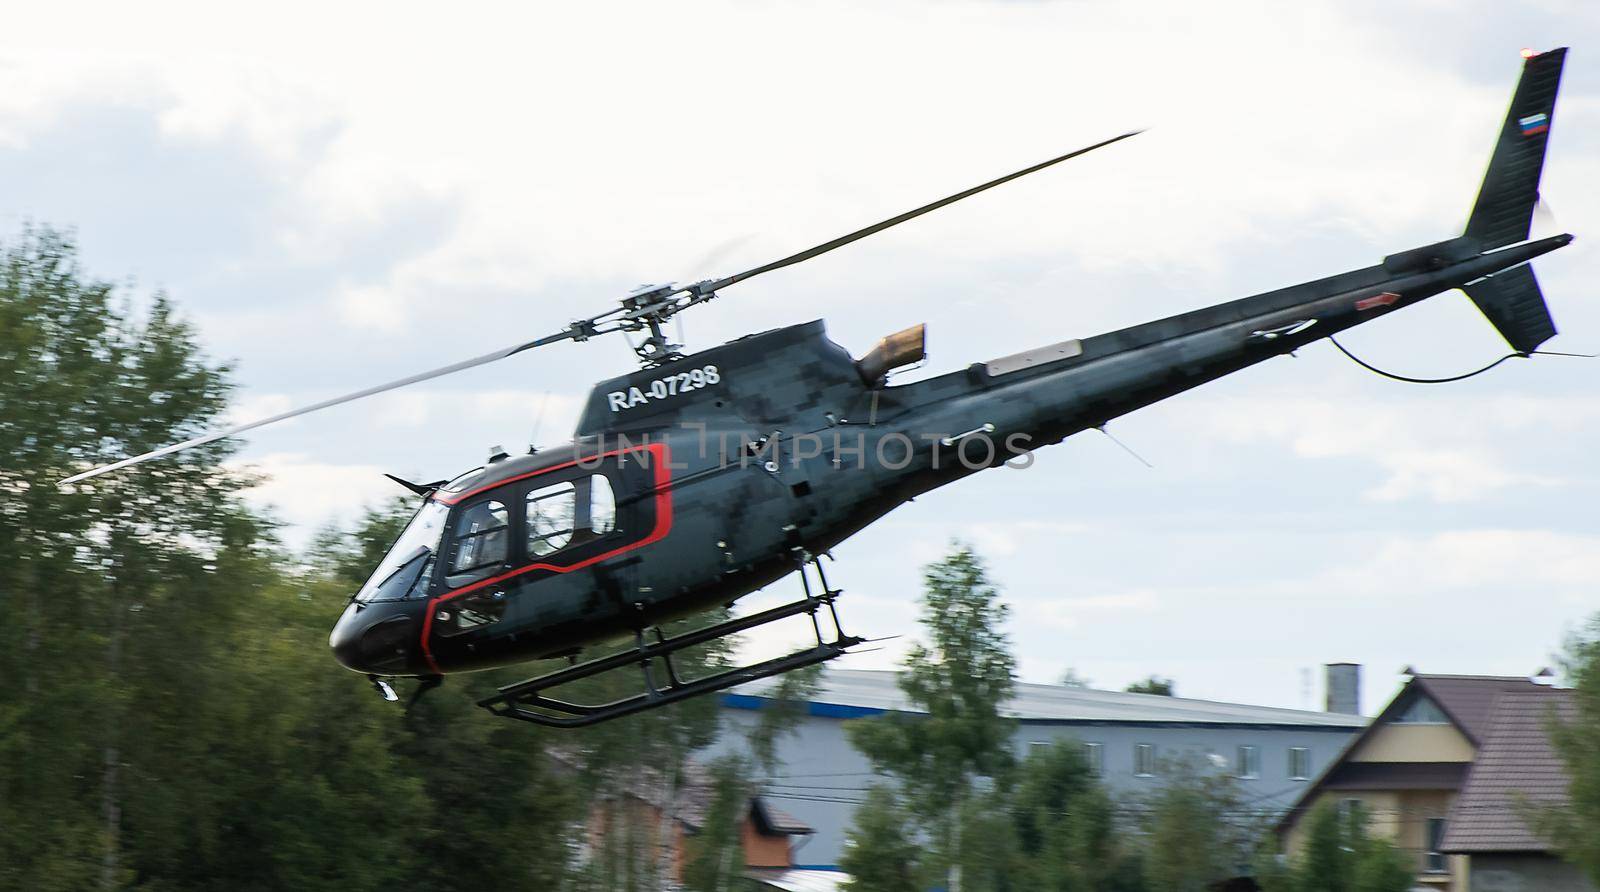 September 12, 2020, Kaluga region, Russia. Helicopter Aerospatiale AS.350 Ecureuil at the airport Oreshkovo.